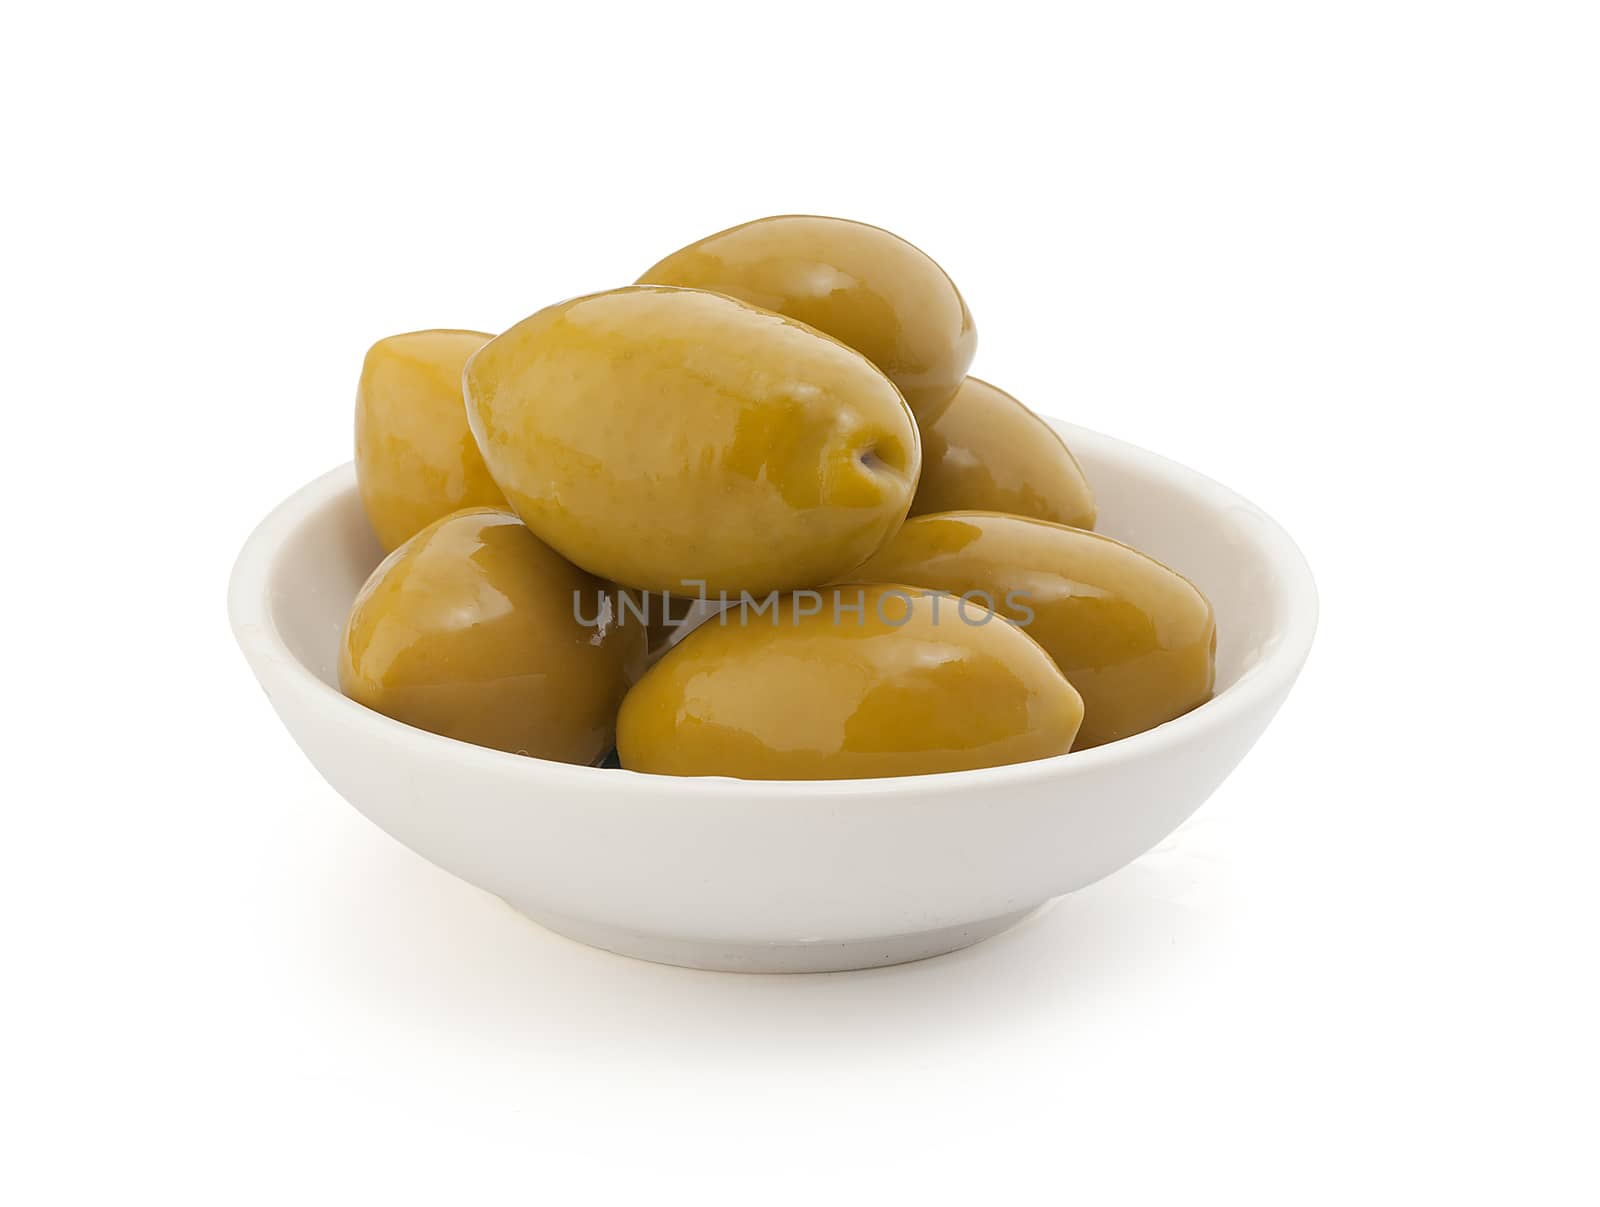 Some marinated olives by Angorius